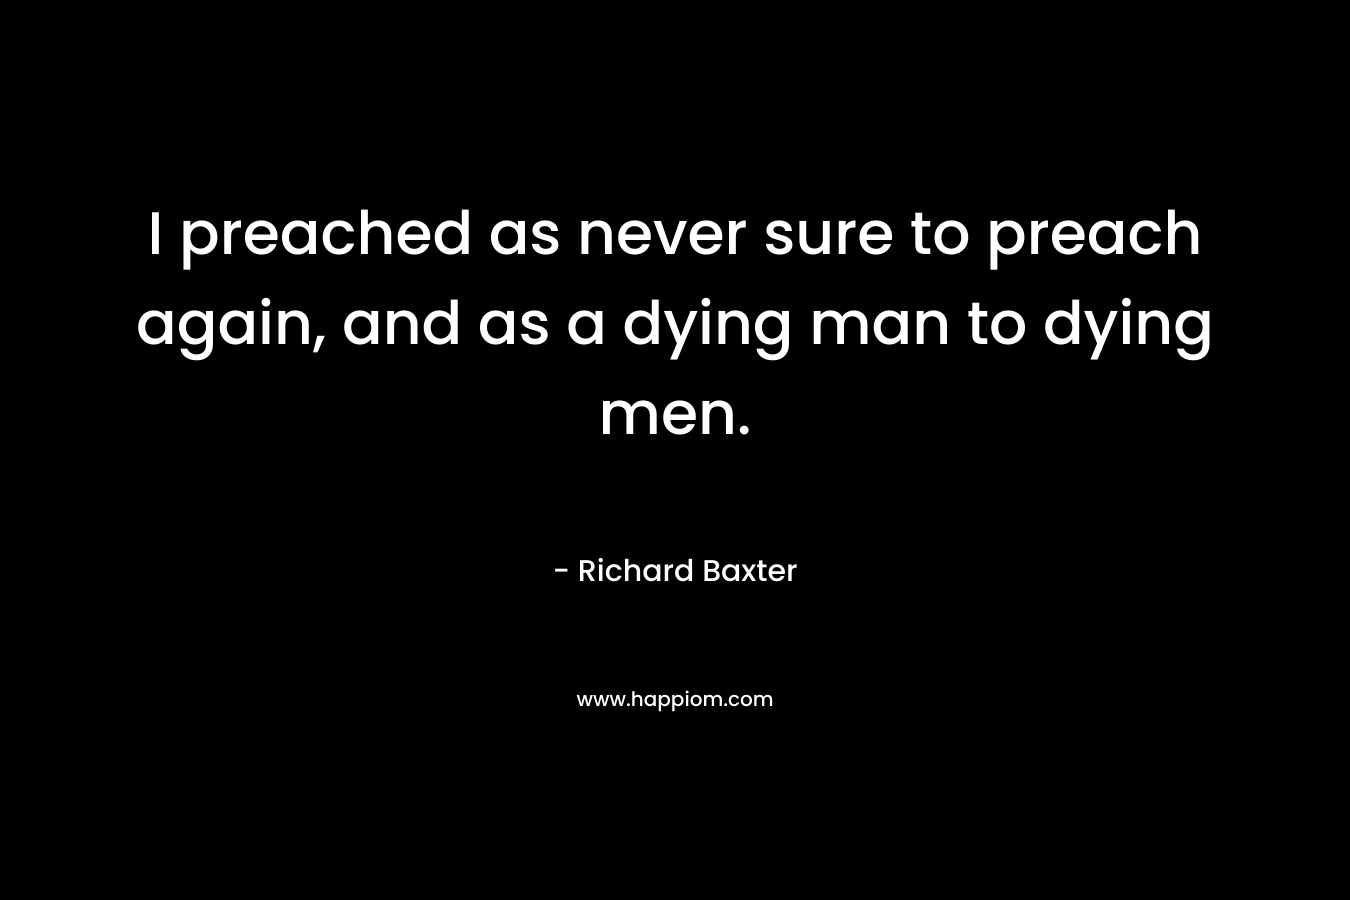 I preached as never sure to preach again, and as a dying man to dying men.